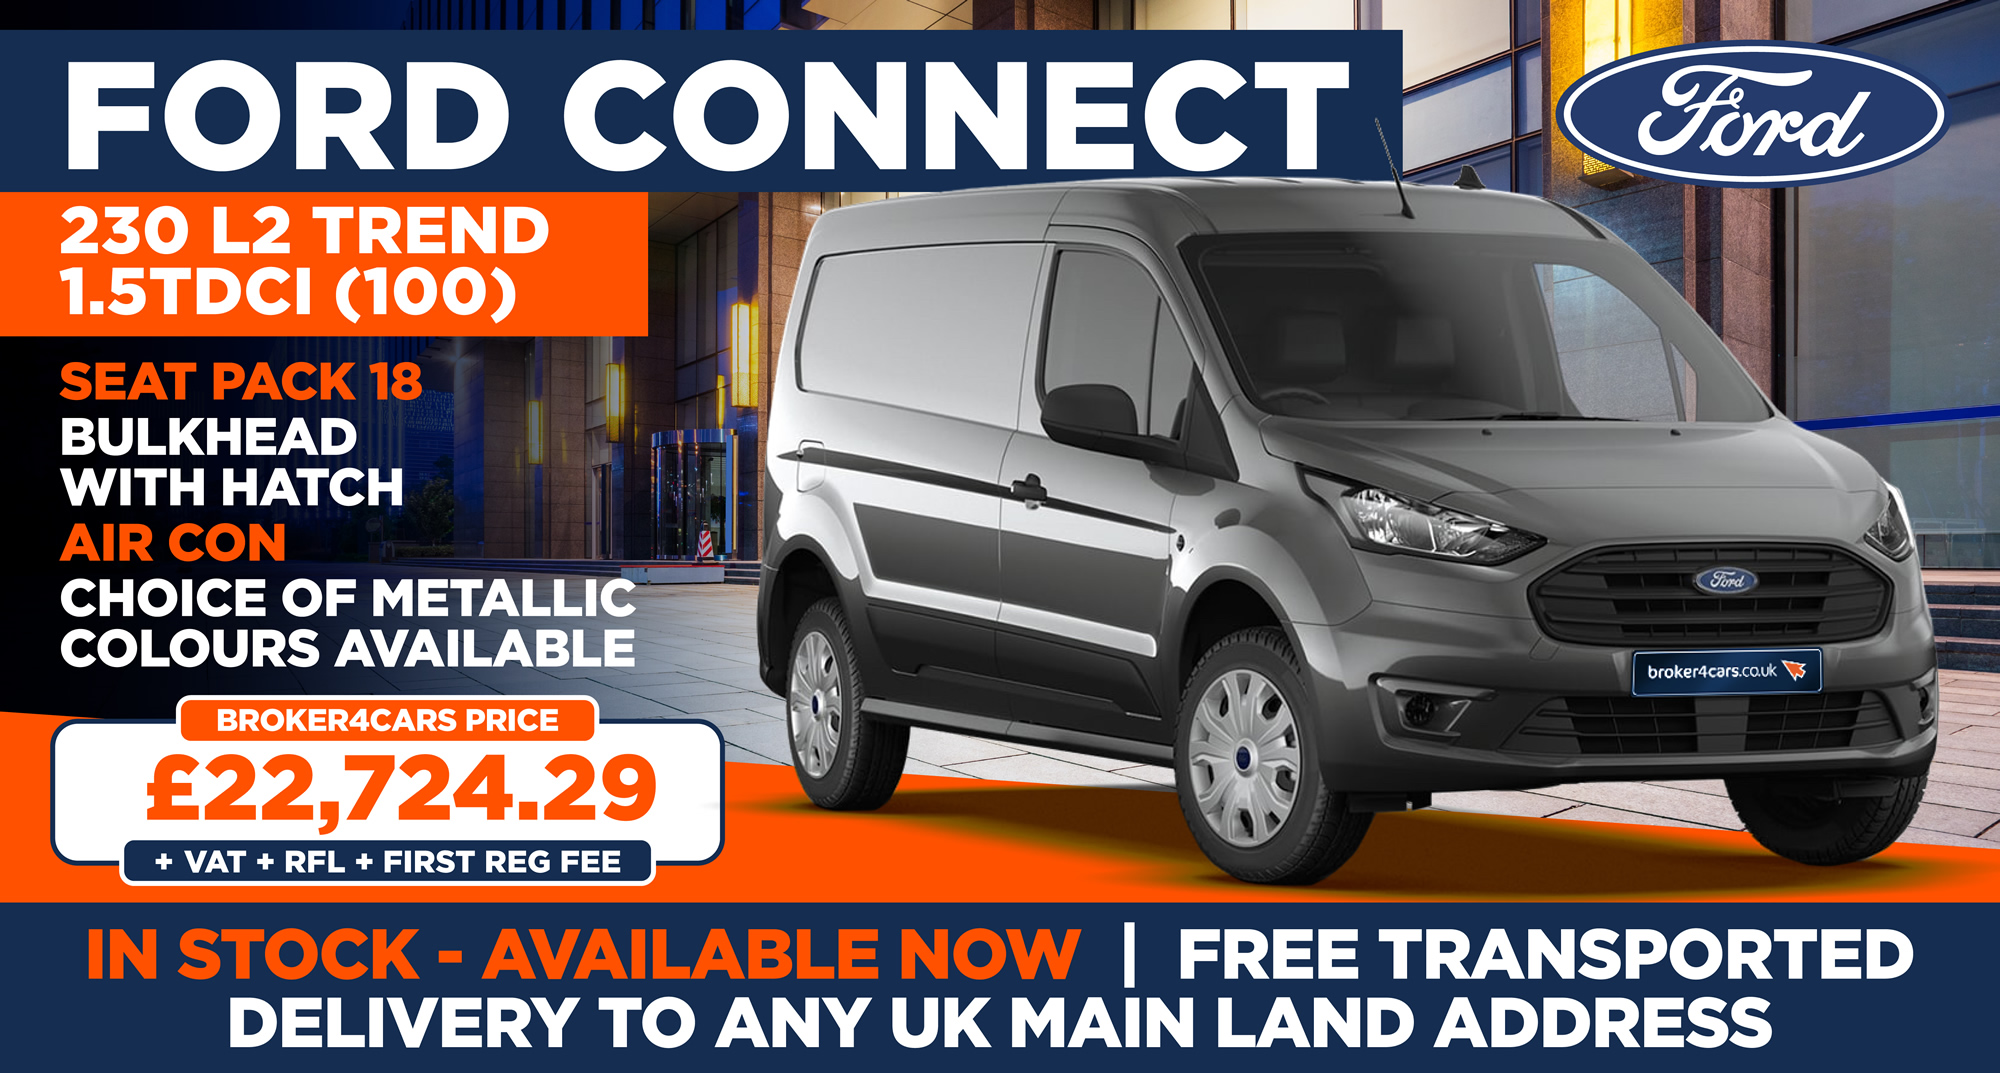 Ford Connect 230 L2 Trend 1.5TDCI (100)Seat Pack 18, Bulkhead with Hatch, Air Con, Choice of Metallic Colours Available